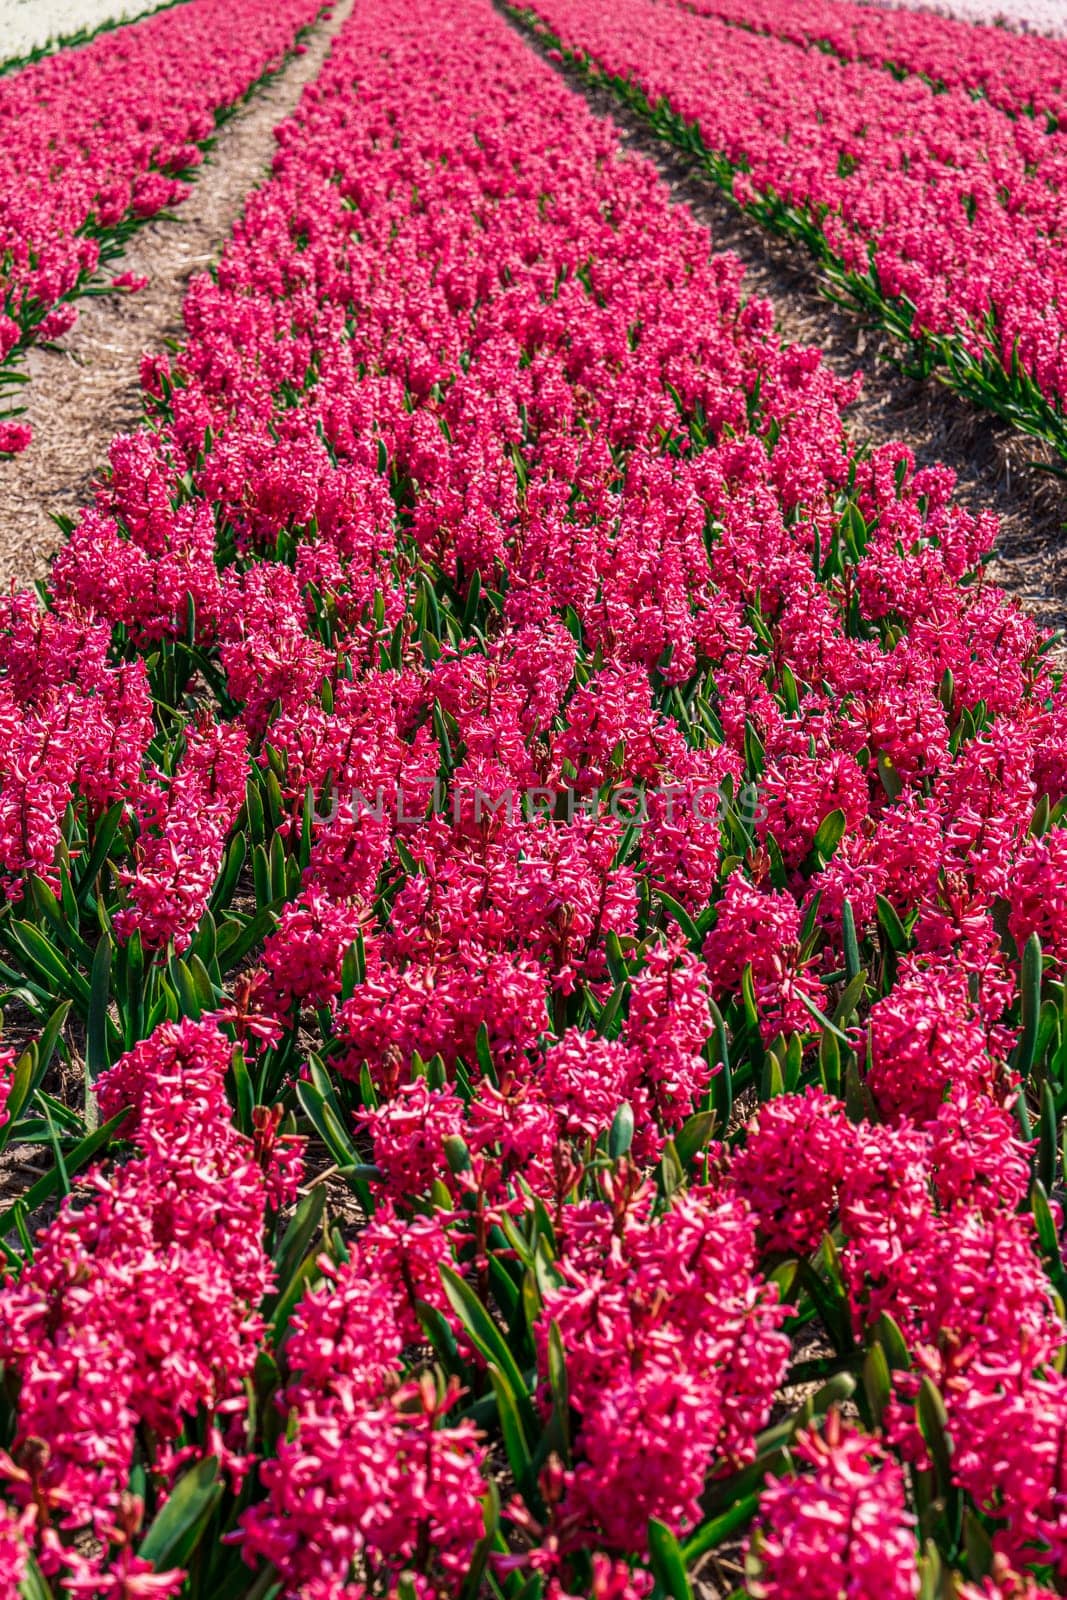 Huge Pink Aromatic Field of Blooming Hyacinths in Bright Day. Captivating Sights of Fragrance and Beauty